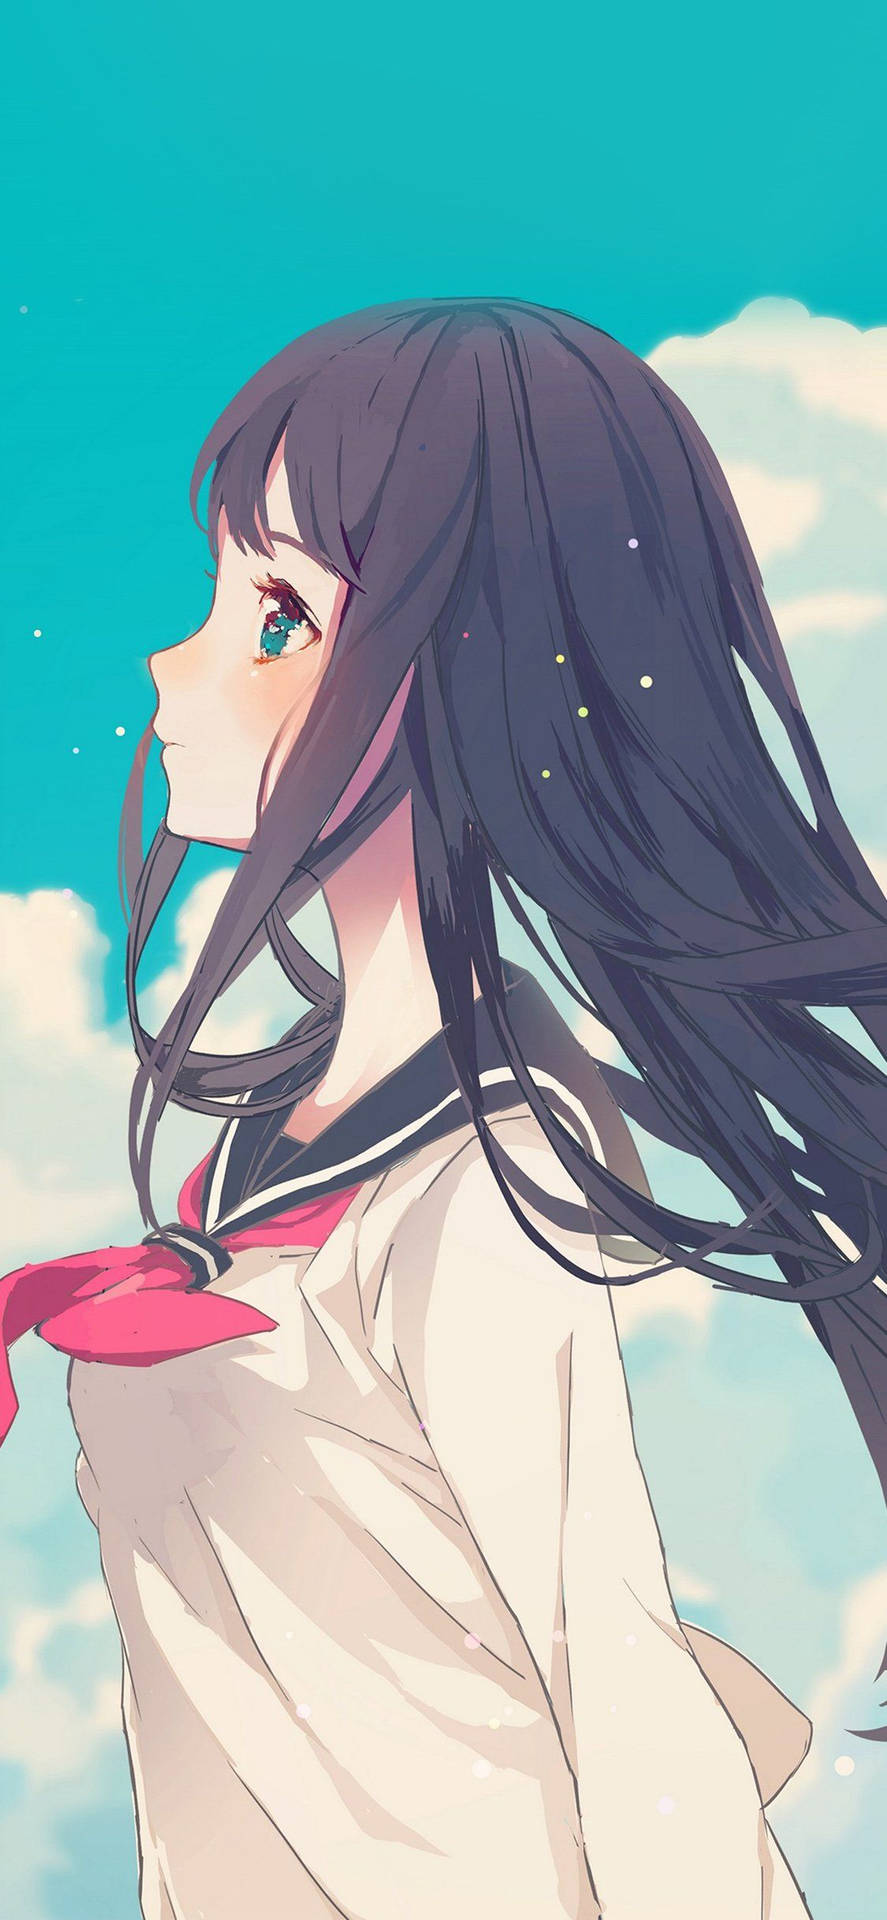 Download Side Profile Cute Anime Girl Iphone Wallpaper 